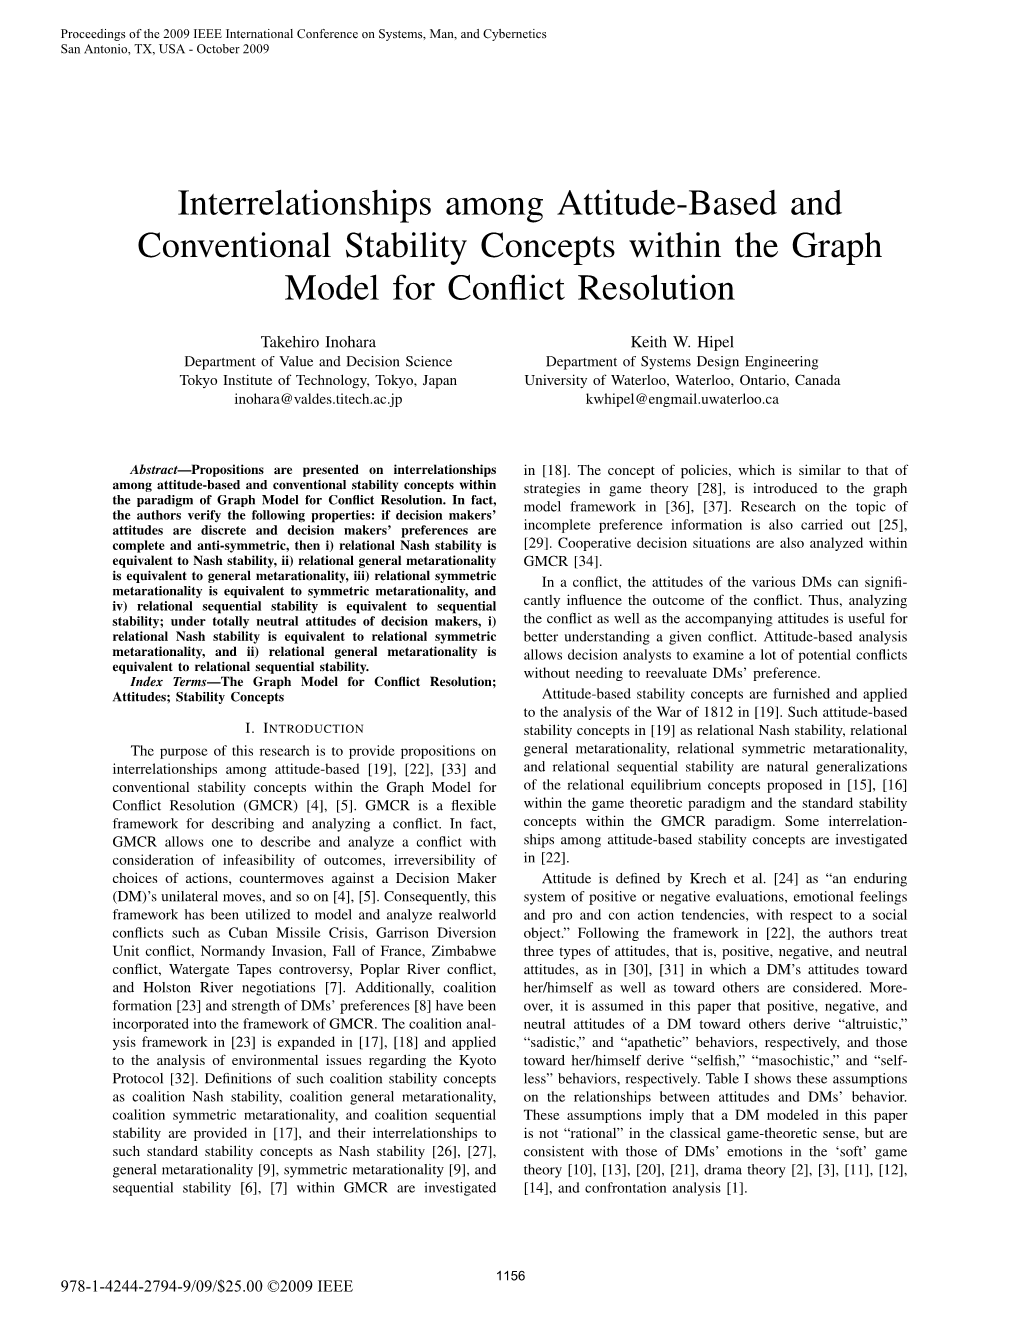 Interrelationships Among Attitude-Based and Conventional Stability Concepts Within the Graph Model for Conﬂict Resolution